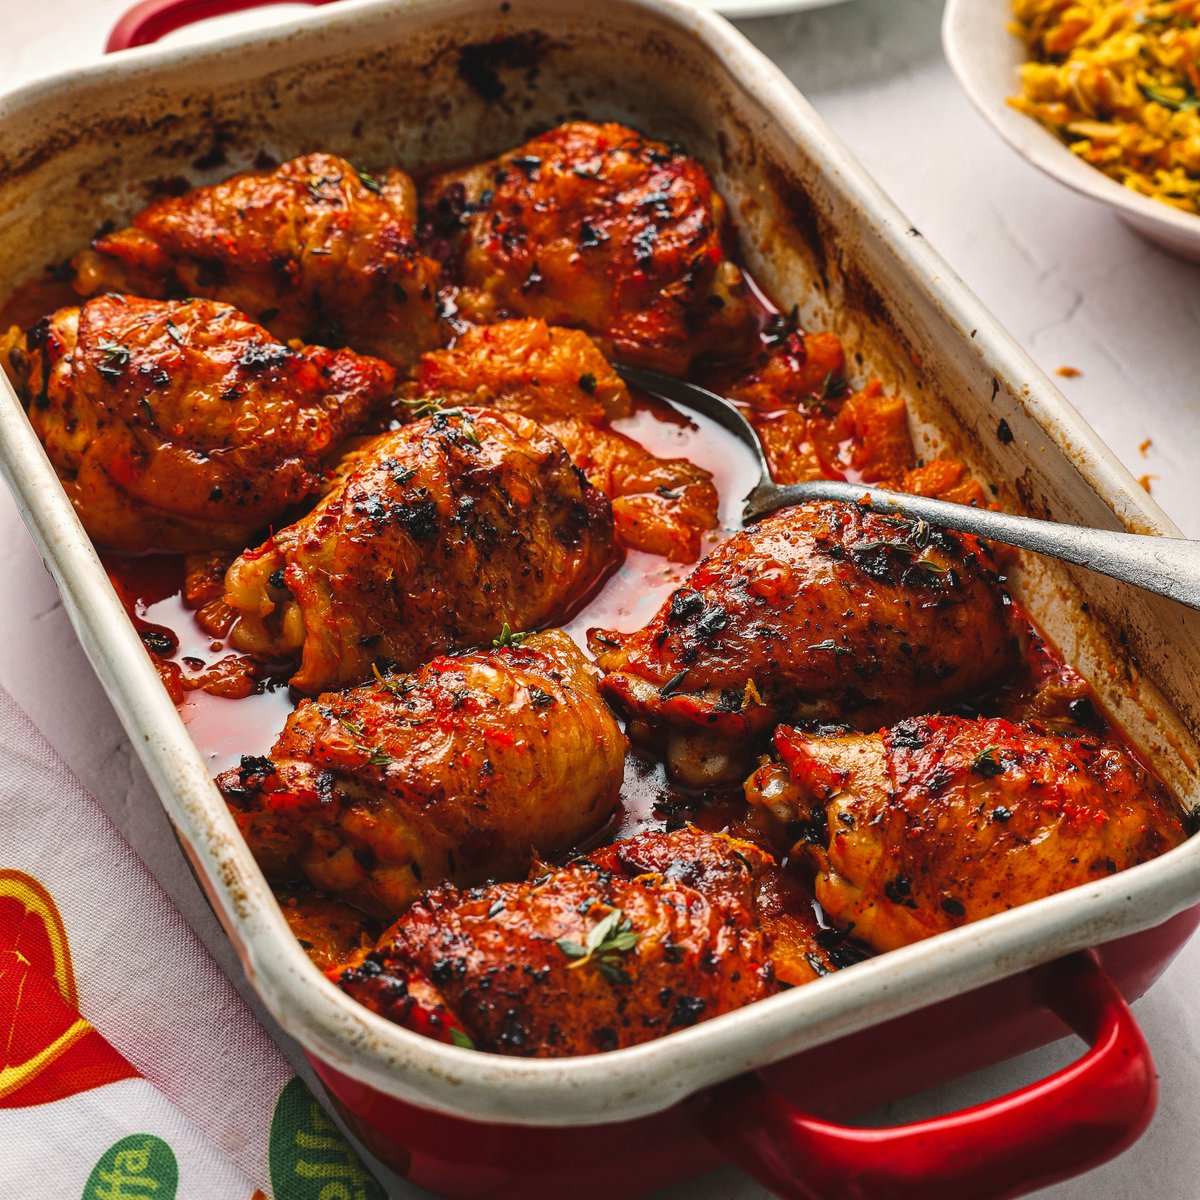 Stocked up on Jaffa fruit for the Bank Holiday weekend? Head to Tesco's now for Jaffa easy peelers for this Harissa & Jaffa easy peeler chicken thighs! jaffa.co.uk/recipes/hariss… Have a delicious weekend! #bankholiday #orangechicken